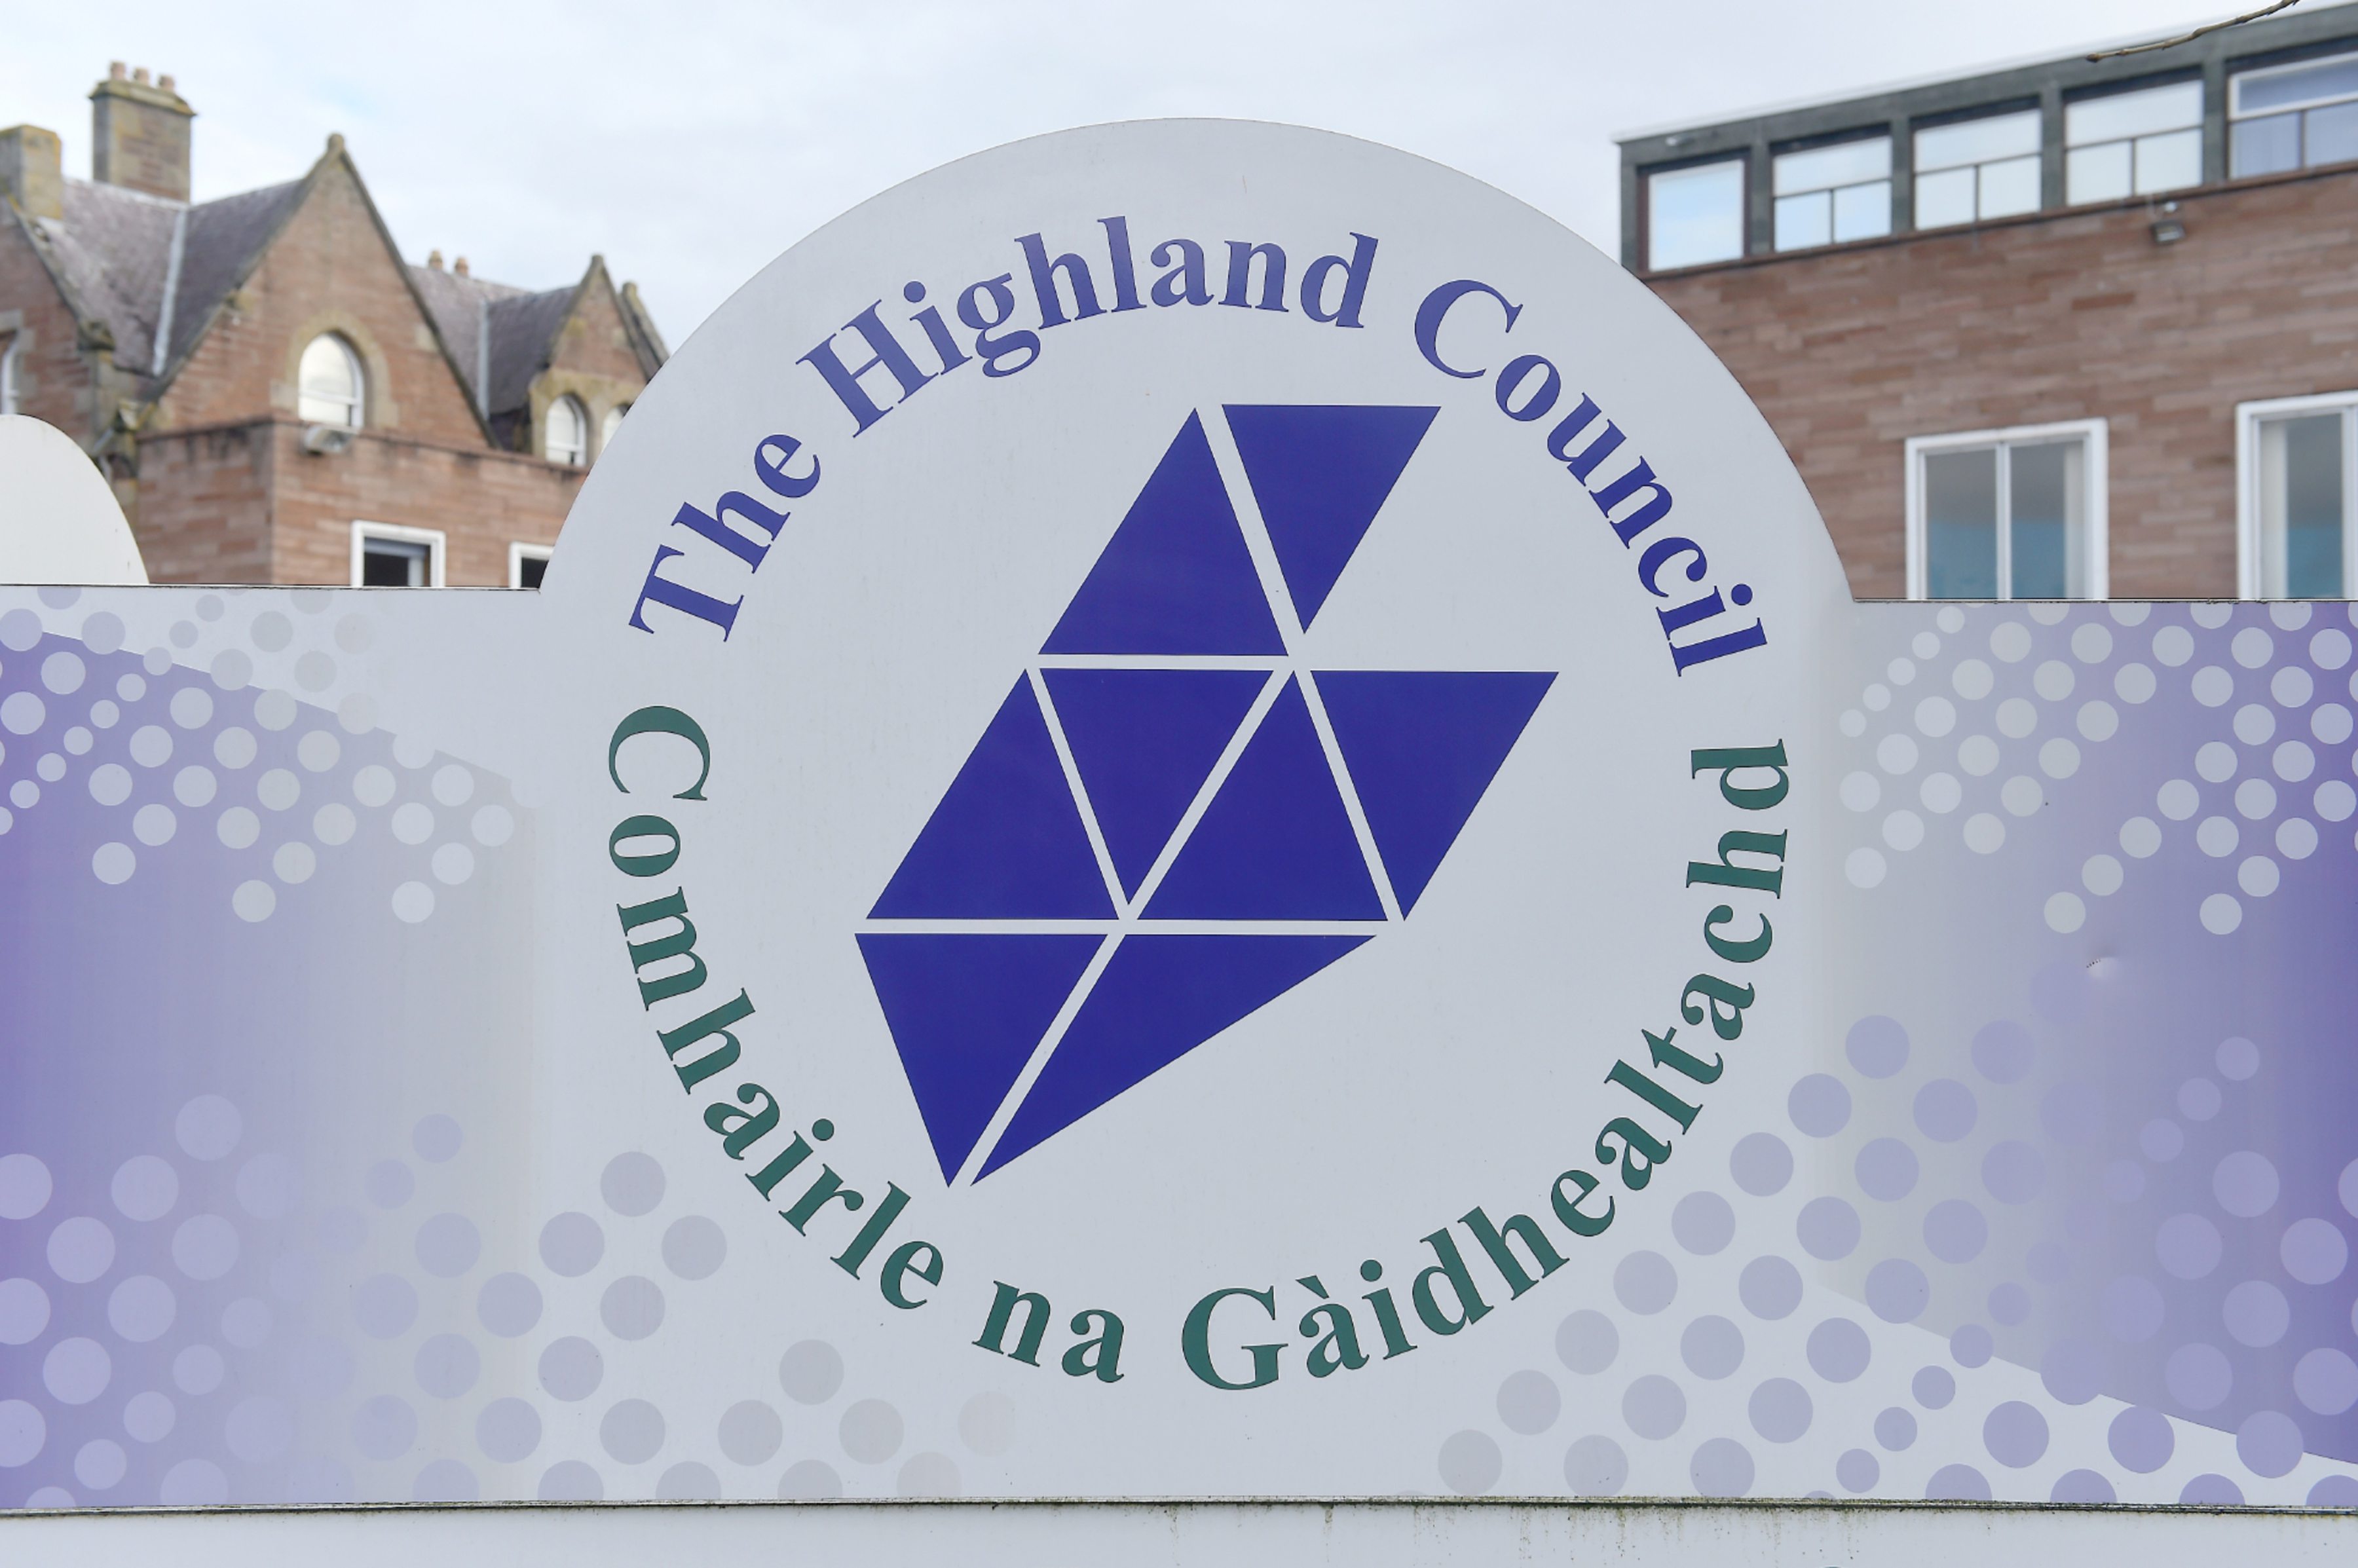 The sign outside the front door of Highland Council headquarters in Inverness, It reads The Highland Council and then the name in Gaelic as well.